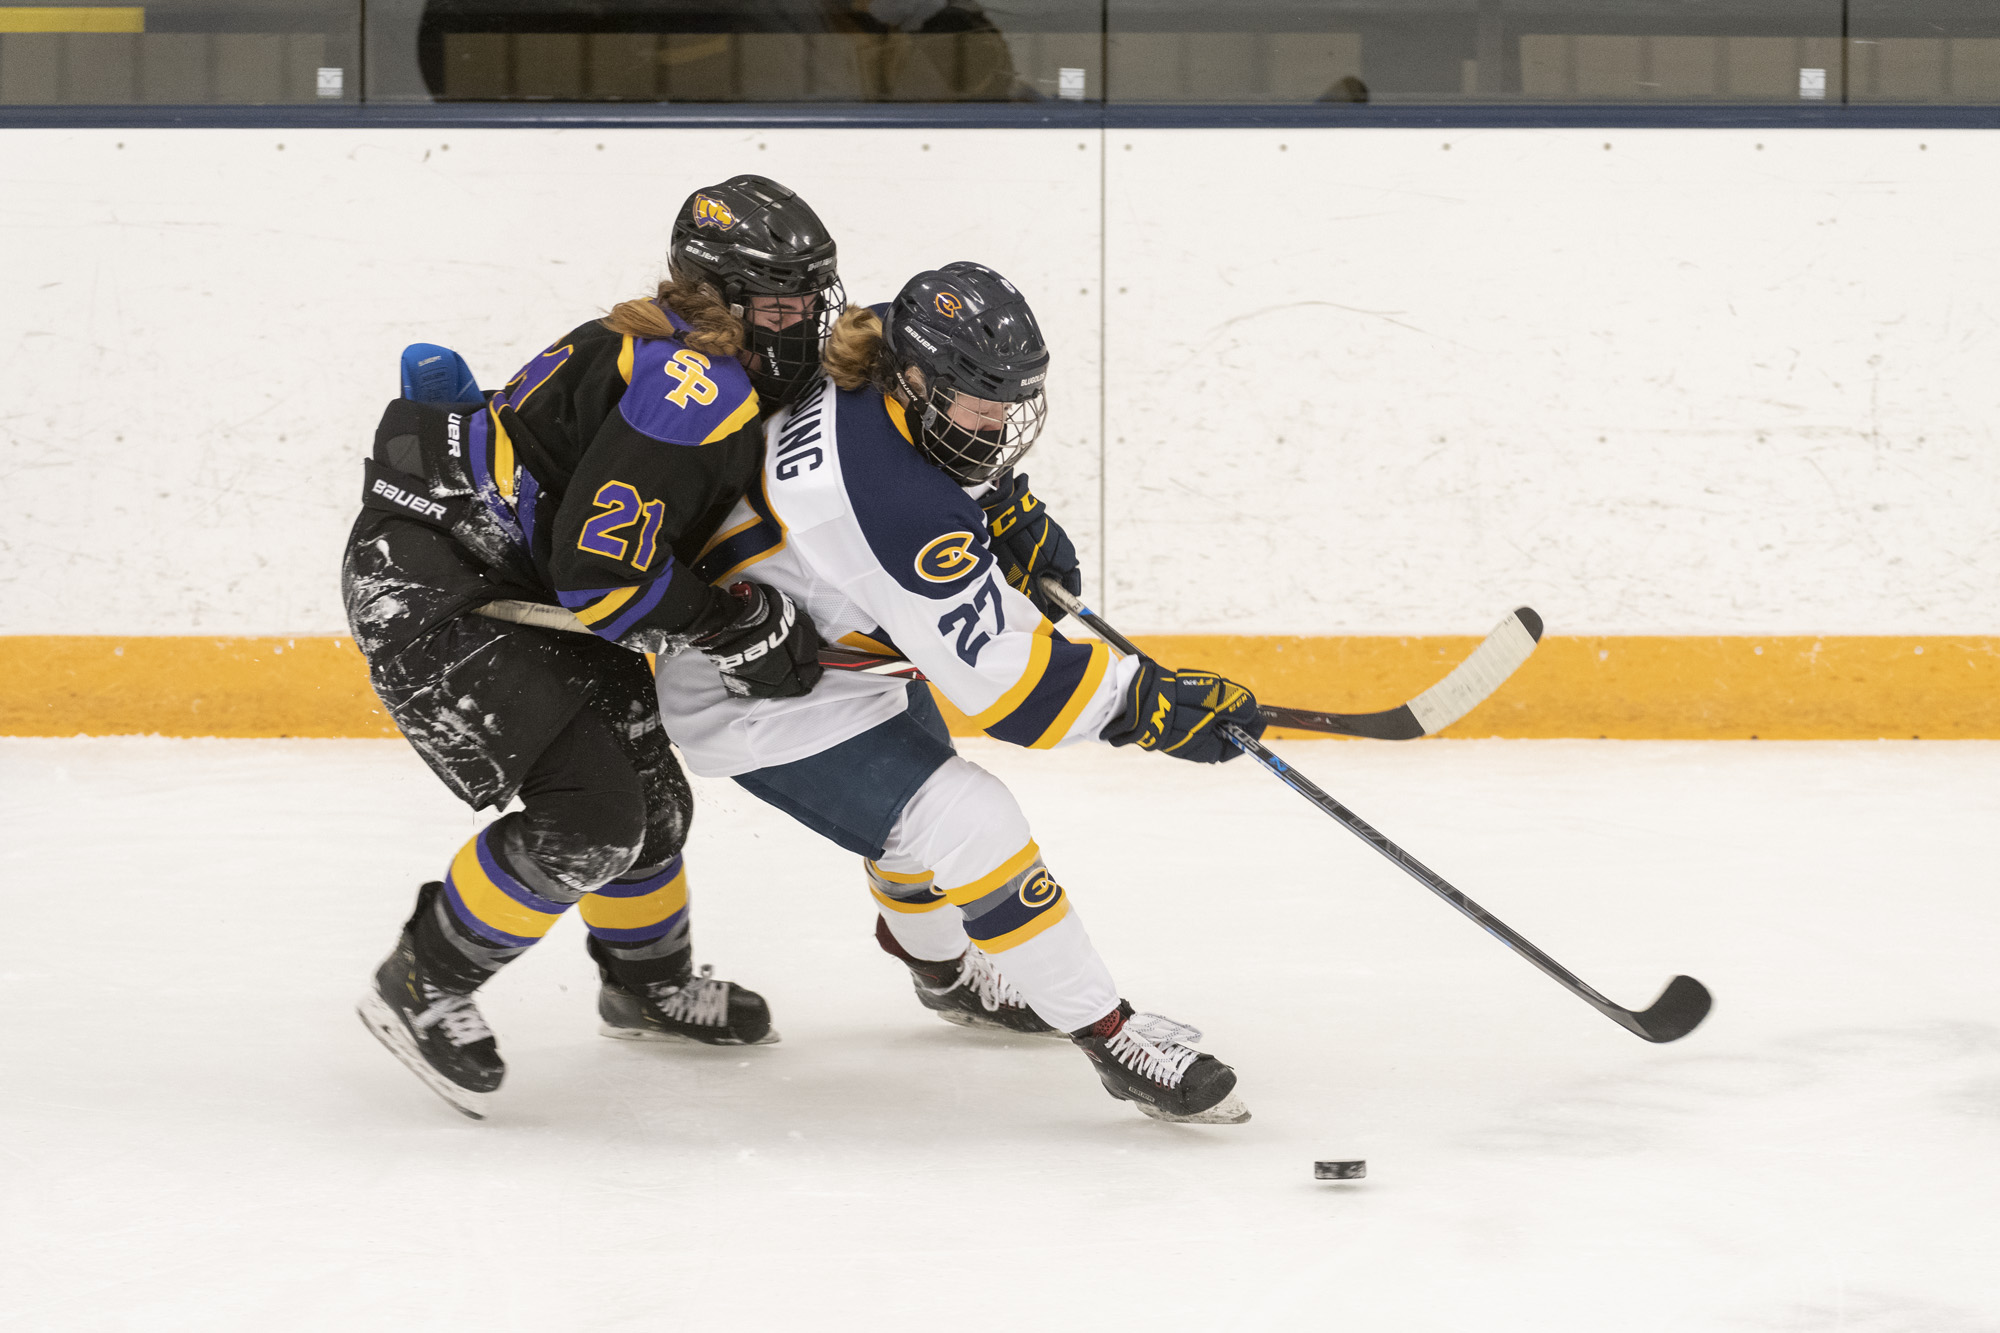 Women's Hockey downs River Falls, improves to 6-0-1